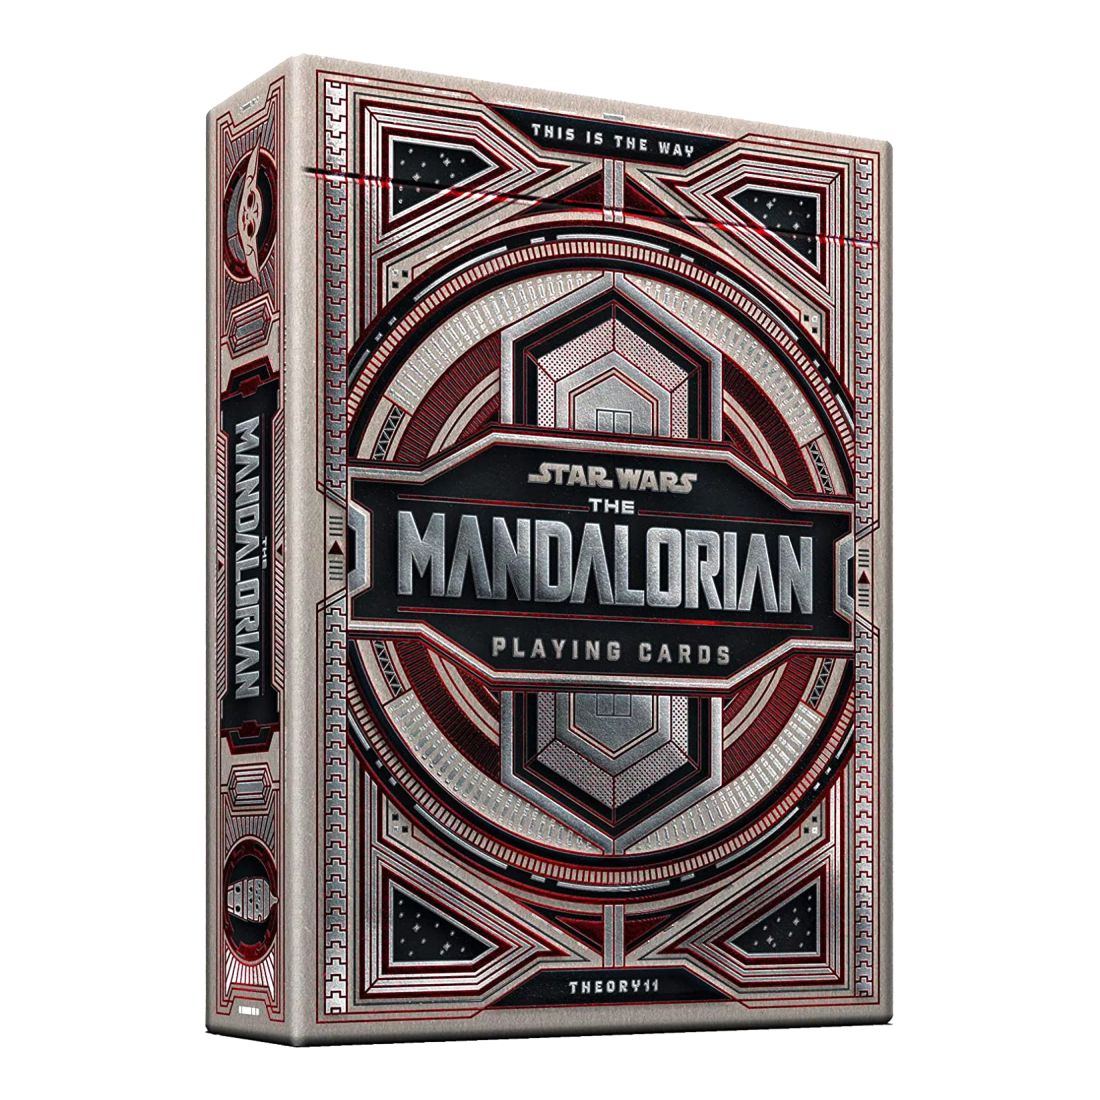 Theory11 The Mandalorian Playing Cards